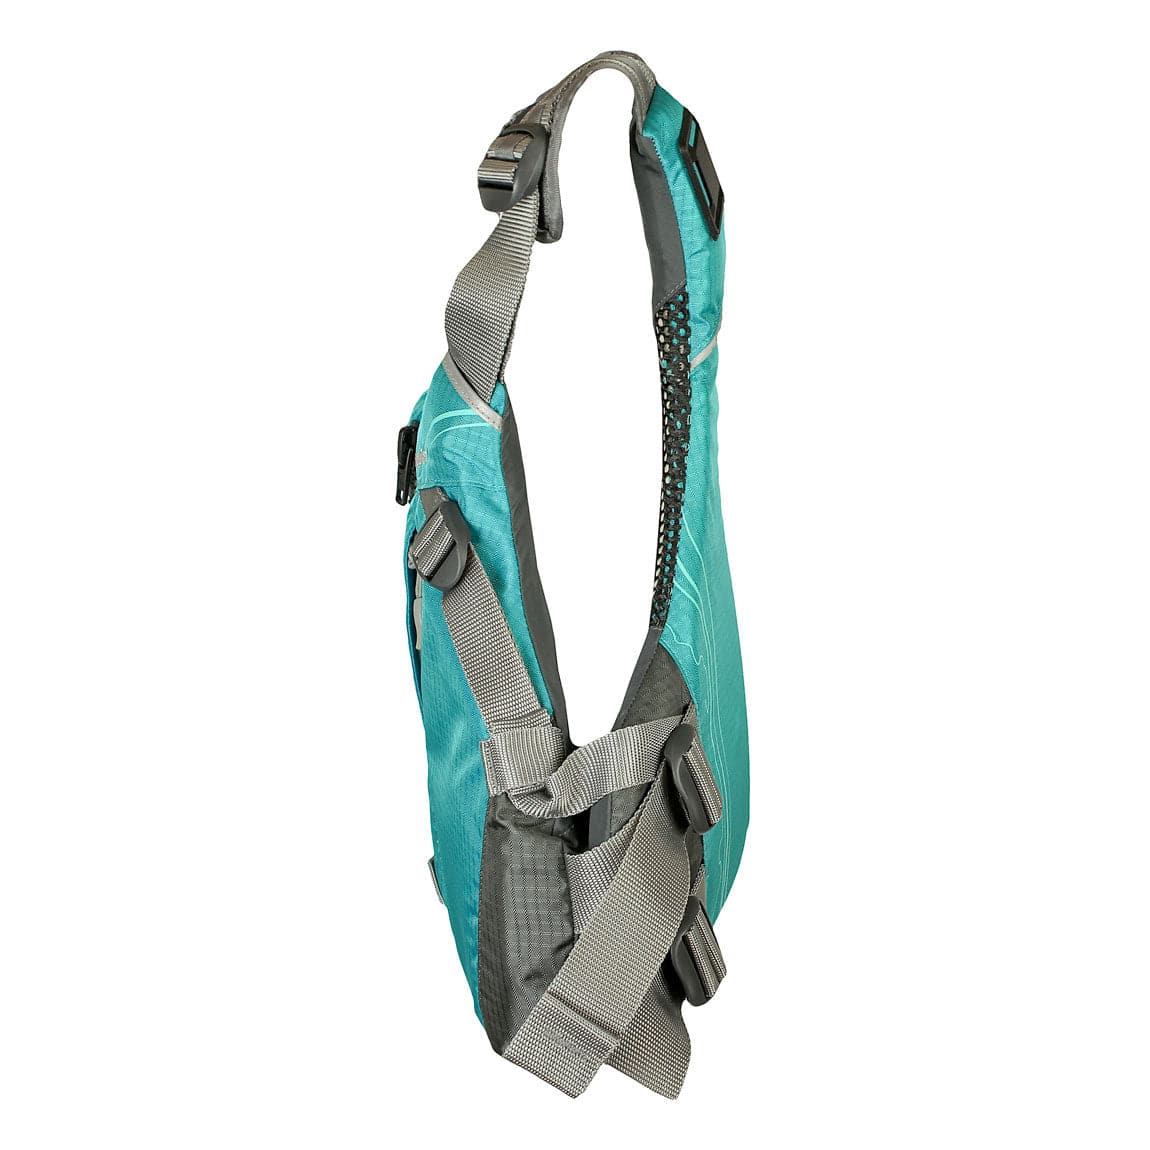 Featuring the Glide PFD women's pfd manufactured by Stohlquist shown here from a sixth angle.